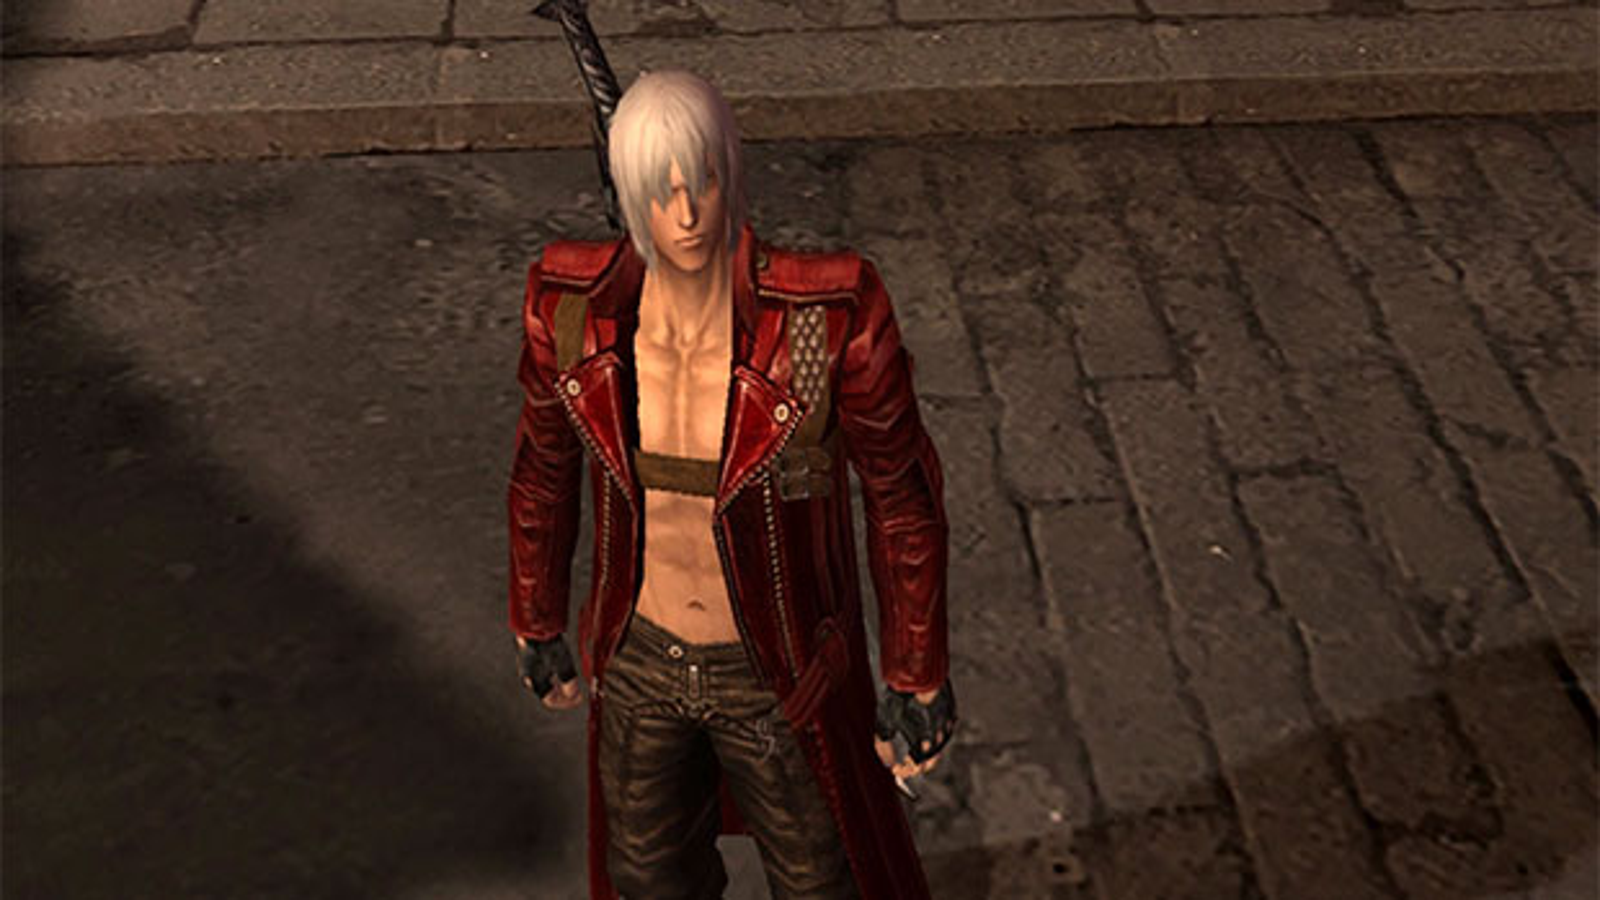 PC / Computer - DmC: Devil May Cry - Dante (Coatless) - The Models Resource